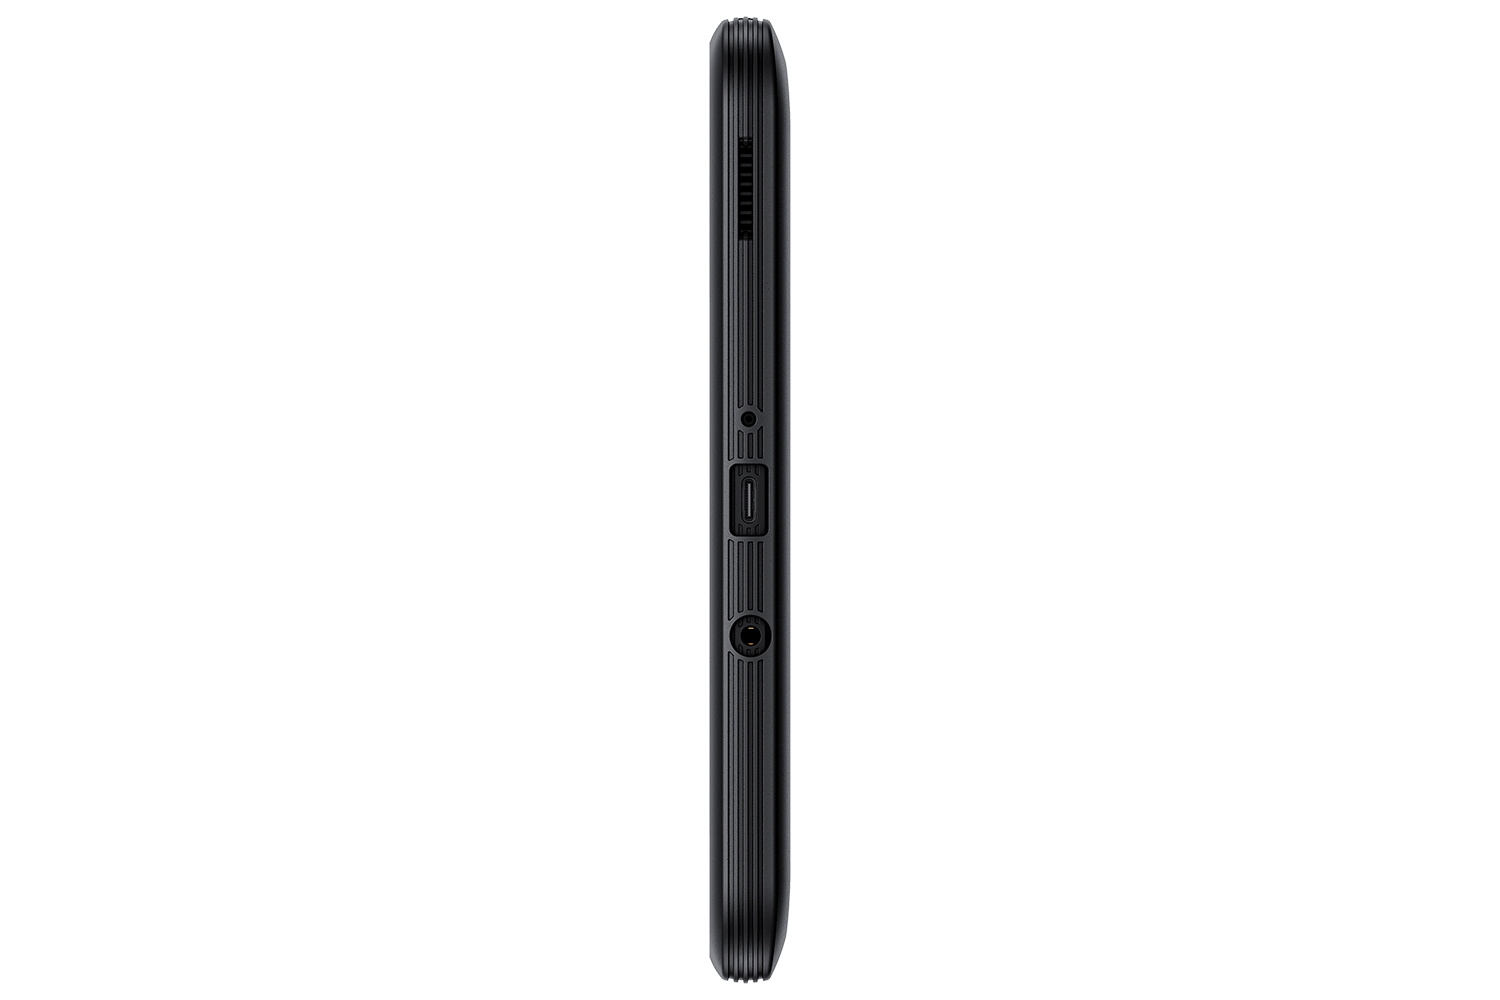 009_product_galaxy_tabactive4pro_black_r_side.jpg